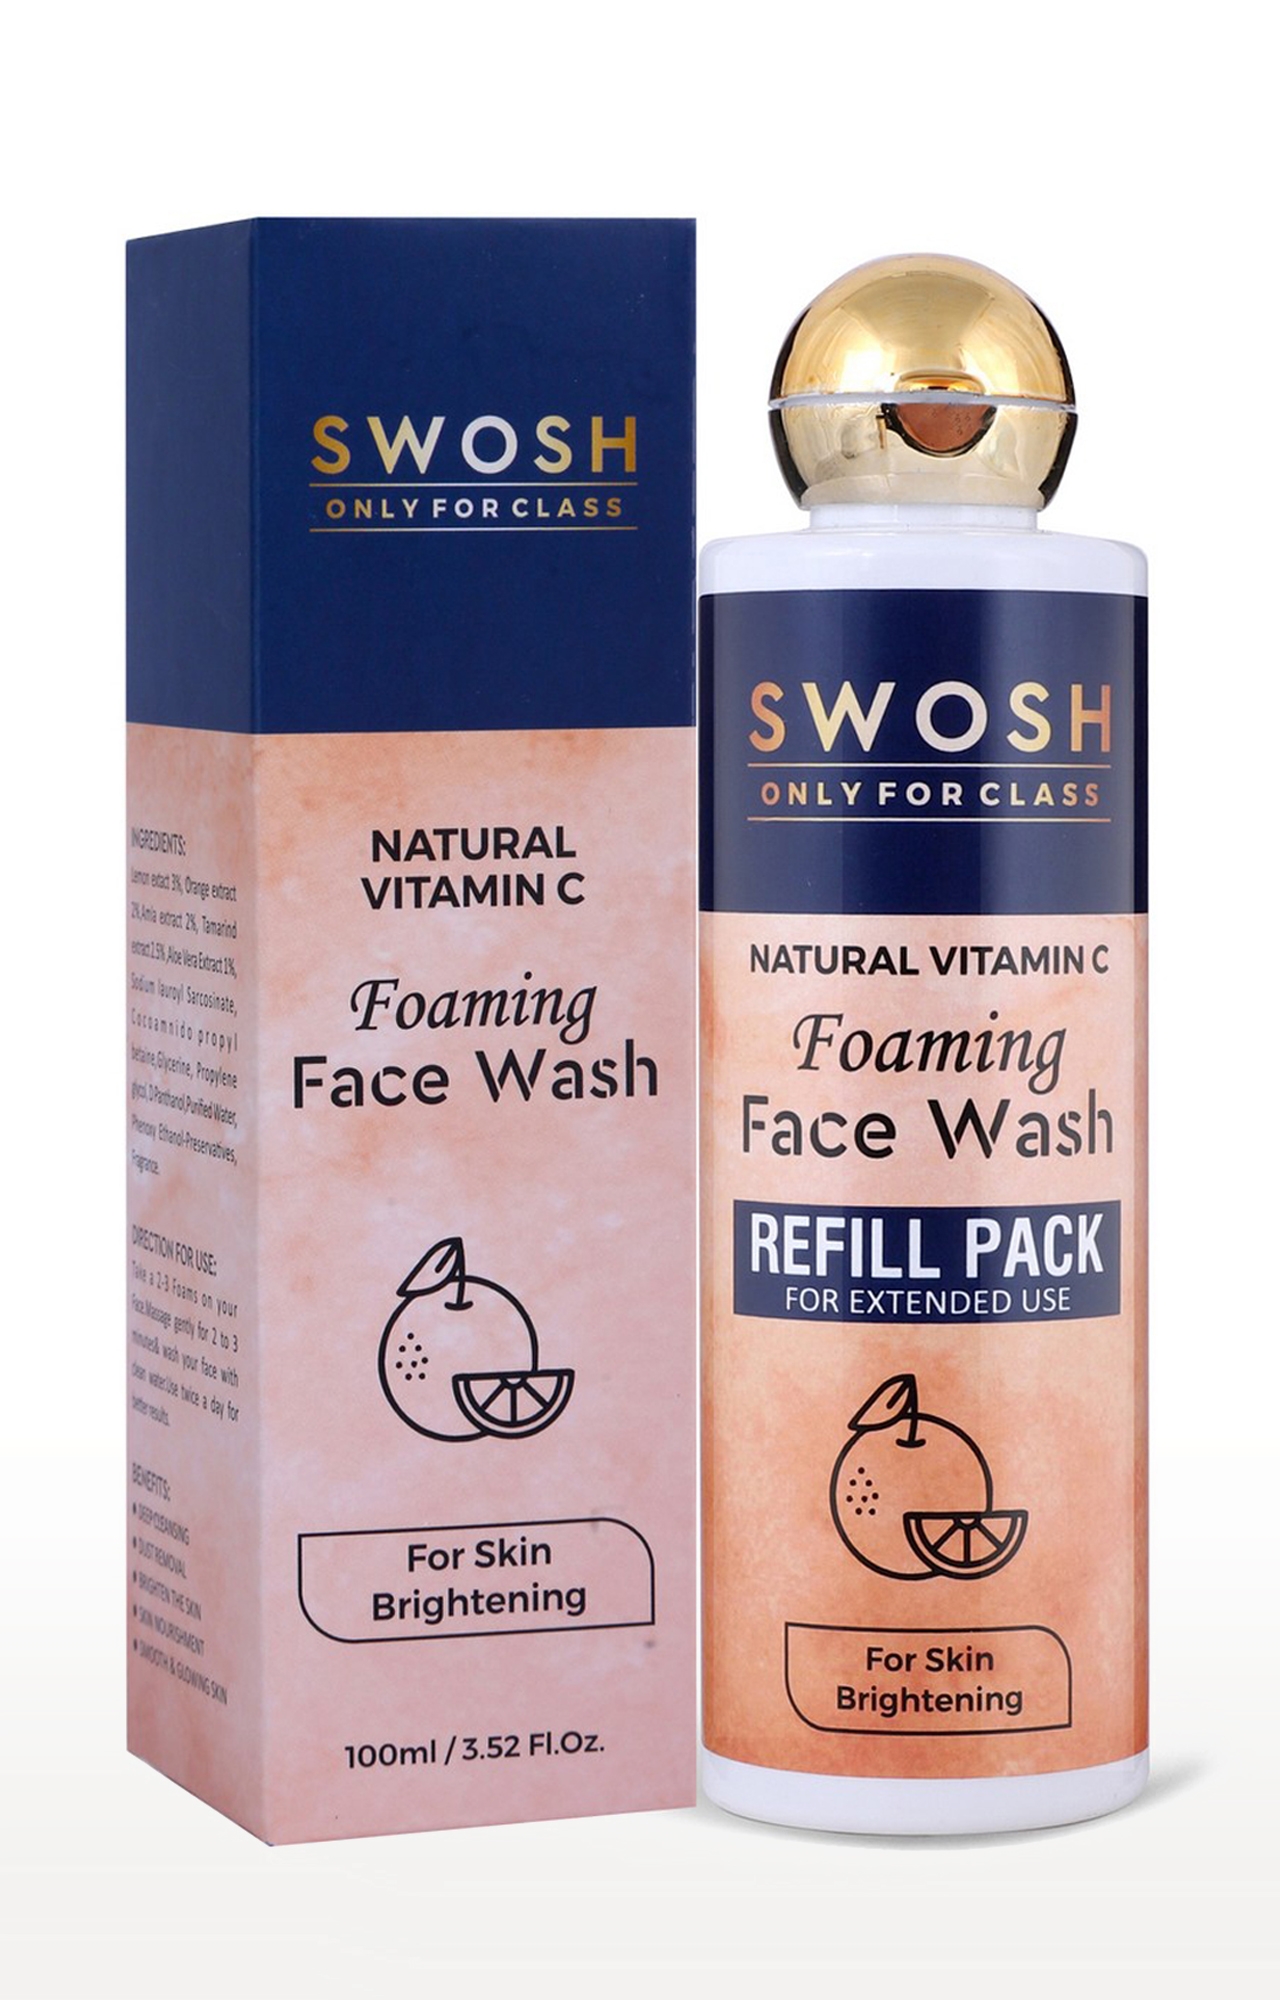 SWOSH | Swosh Natural Vitamin C Foaming Face Wash 2 In 1 Refill Pack For Pimple Prone & Oily Skin - No Parabens, Sulphate, Silicones & Colour, Pack Of 200 Ml